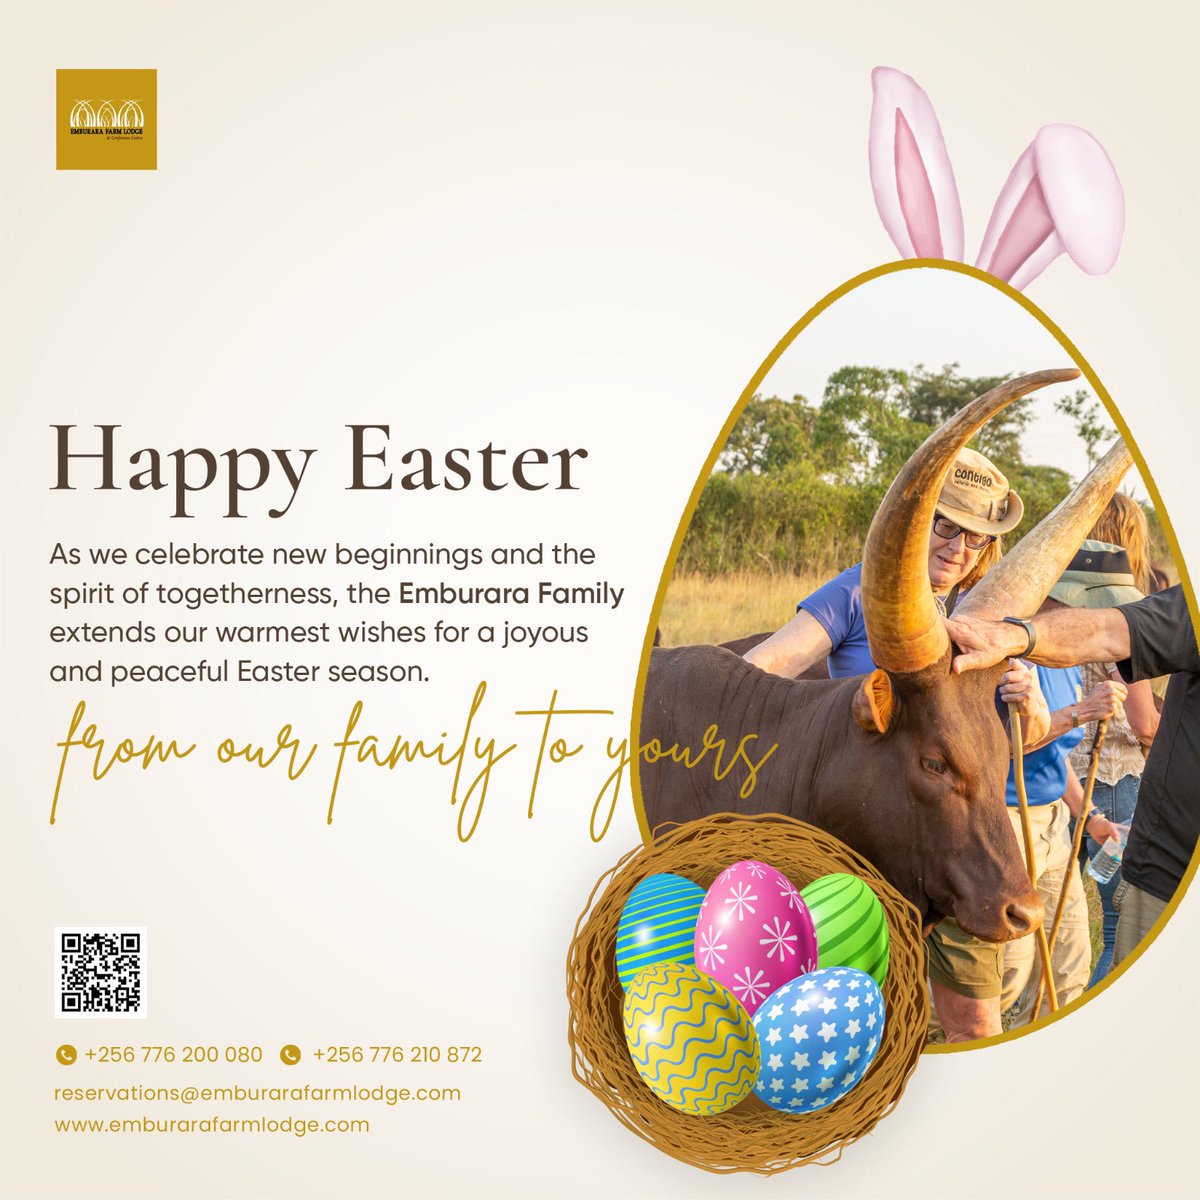 Wishing you an egg-stra special #Easter filled with joy, blessings and lots of chocolate eggs 🐣